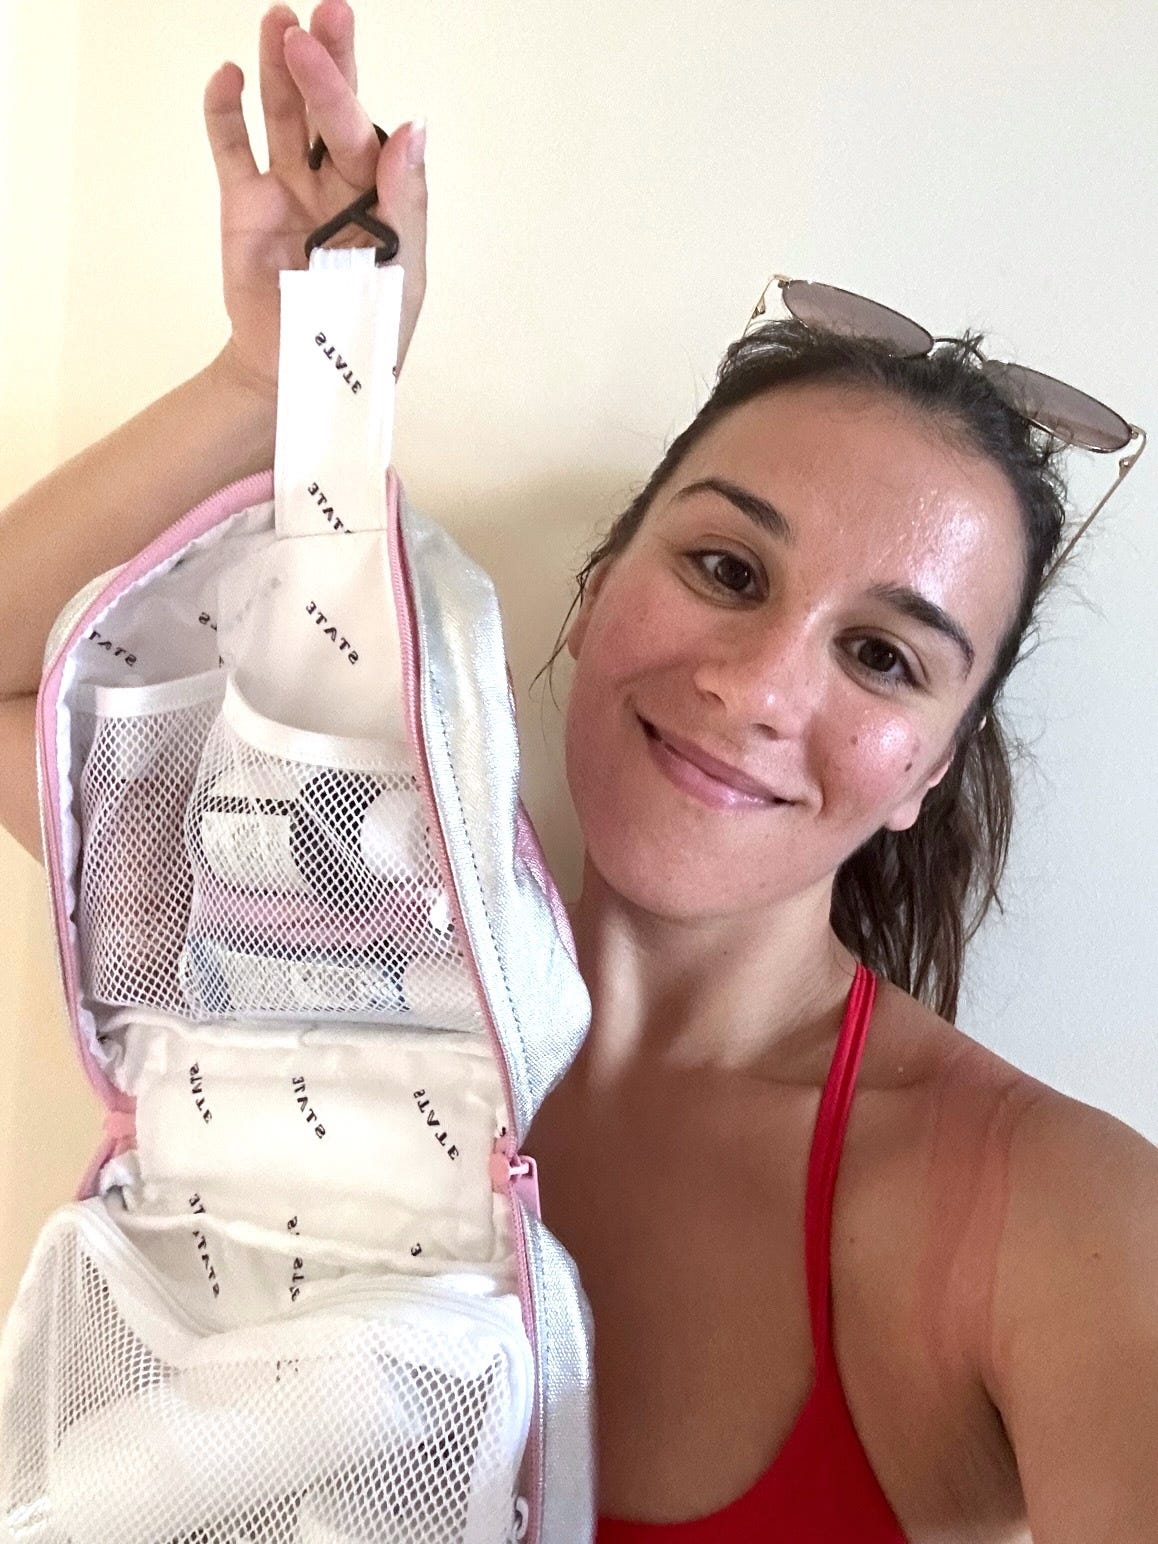 <p>When it was time to throw out the cheap toiletry bag she had been traveling with for years, Konstantinides knew the next one needed to be a major upgrade. </p><p>And after reading many "best of" lists and comparing various brands, she finally settled on the <a href="https://affiliate.insider.com/?amazonTrackingID=biauto-60047-20&disabled=false&h=325d3b9bf546f13632b79e882b1293aca4da52486f65dae14907ac8d1891756a&platform=browser&platform=msn_reviews&postID=64bab20a30c74caf0324f9a4&sc=false&site=in&u=https%3A%2F%2Fstatebags.com%2Fproducts%2Flaguardia-dopp-kit-metallic-pink-silver&utm_source=msn_reviews" rel="noopener">Bensen Toiletry Kit</a> from State, available for between $65 and $68 (it's available in 12 different styles and prints).</p><p>The toiletry kit is large enough to fit her extensive skincare routine, and it's waterproof and easy to spot clean. The metallic pink-and-silver style that Konstantinides opted for also adds some glamor to her carry-on.</p><p><a href="https://www.insider.com/review-state-bags-toiletry-kit-2023-7">Read more.</a></p>